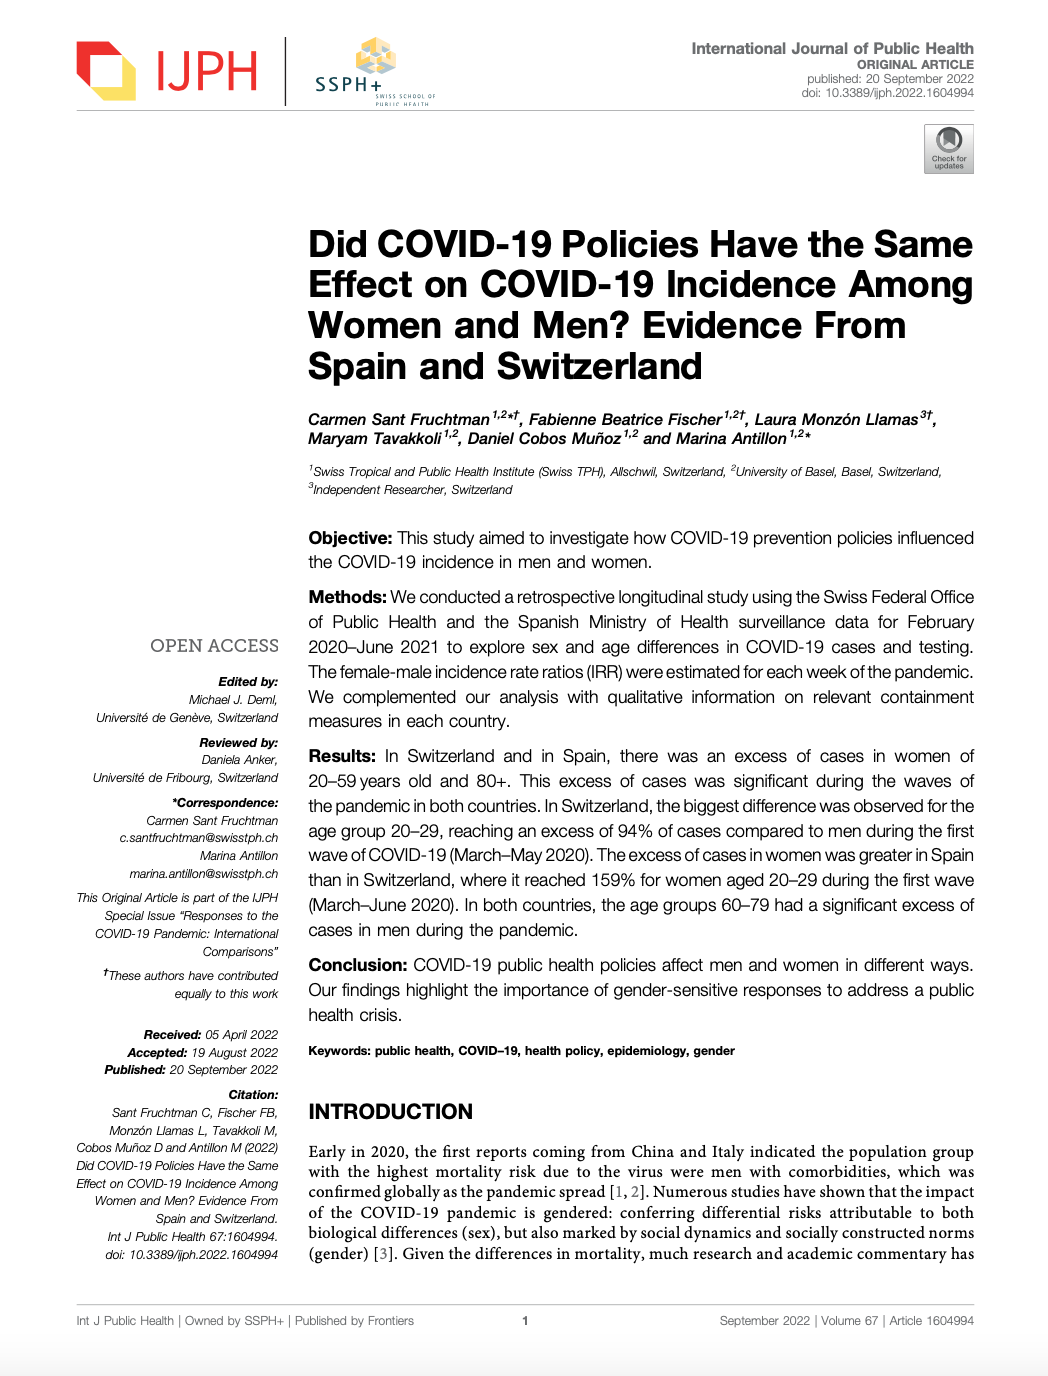 Did COVID-19 Policies Have the Same Effect on COVID-19 Incidence Among Women and Men? Evidence From Spain and Switzerland